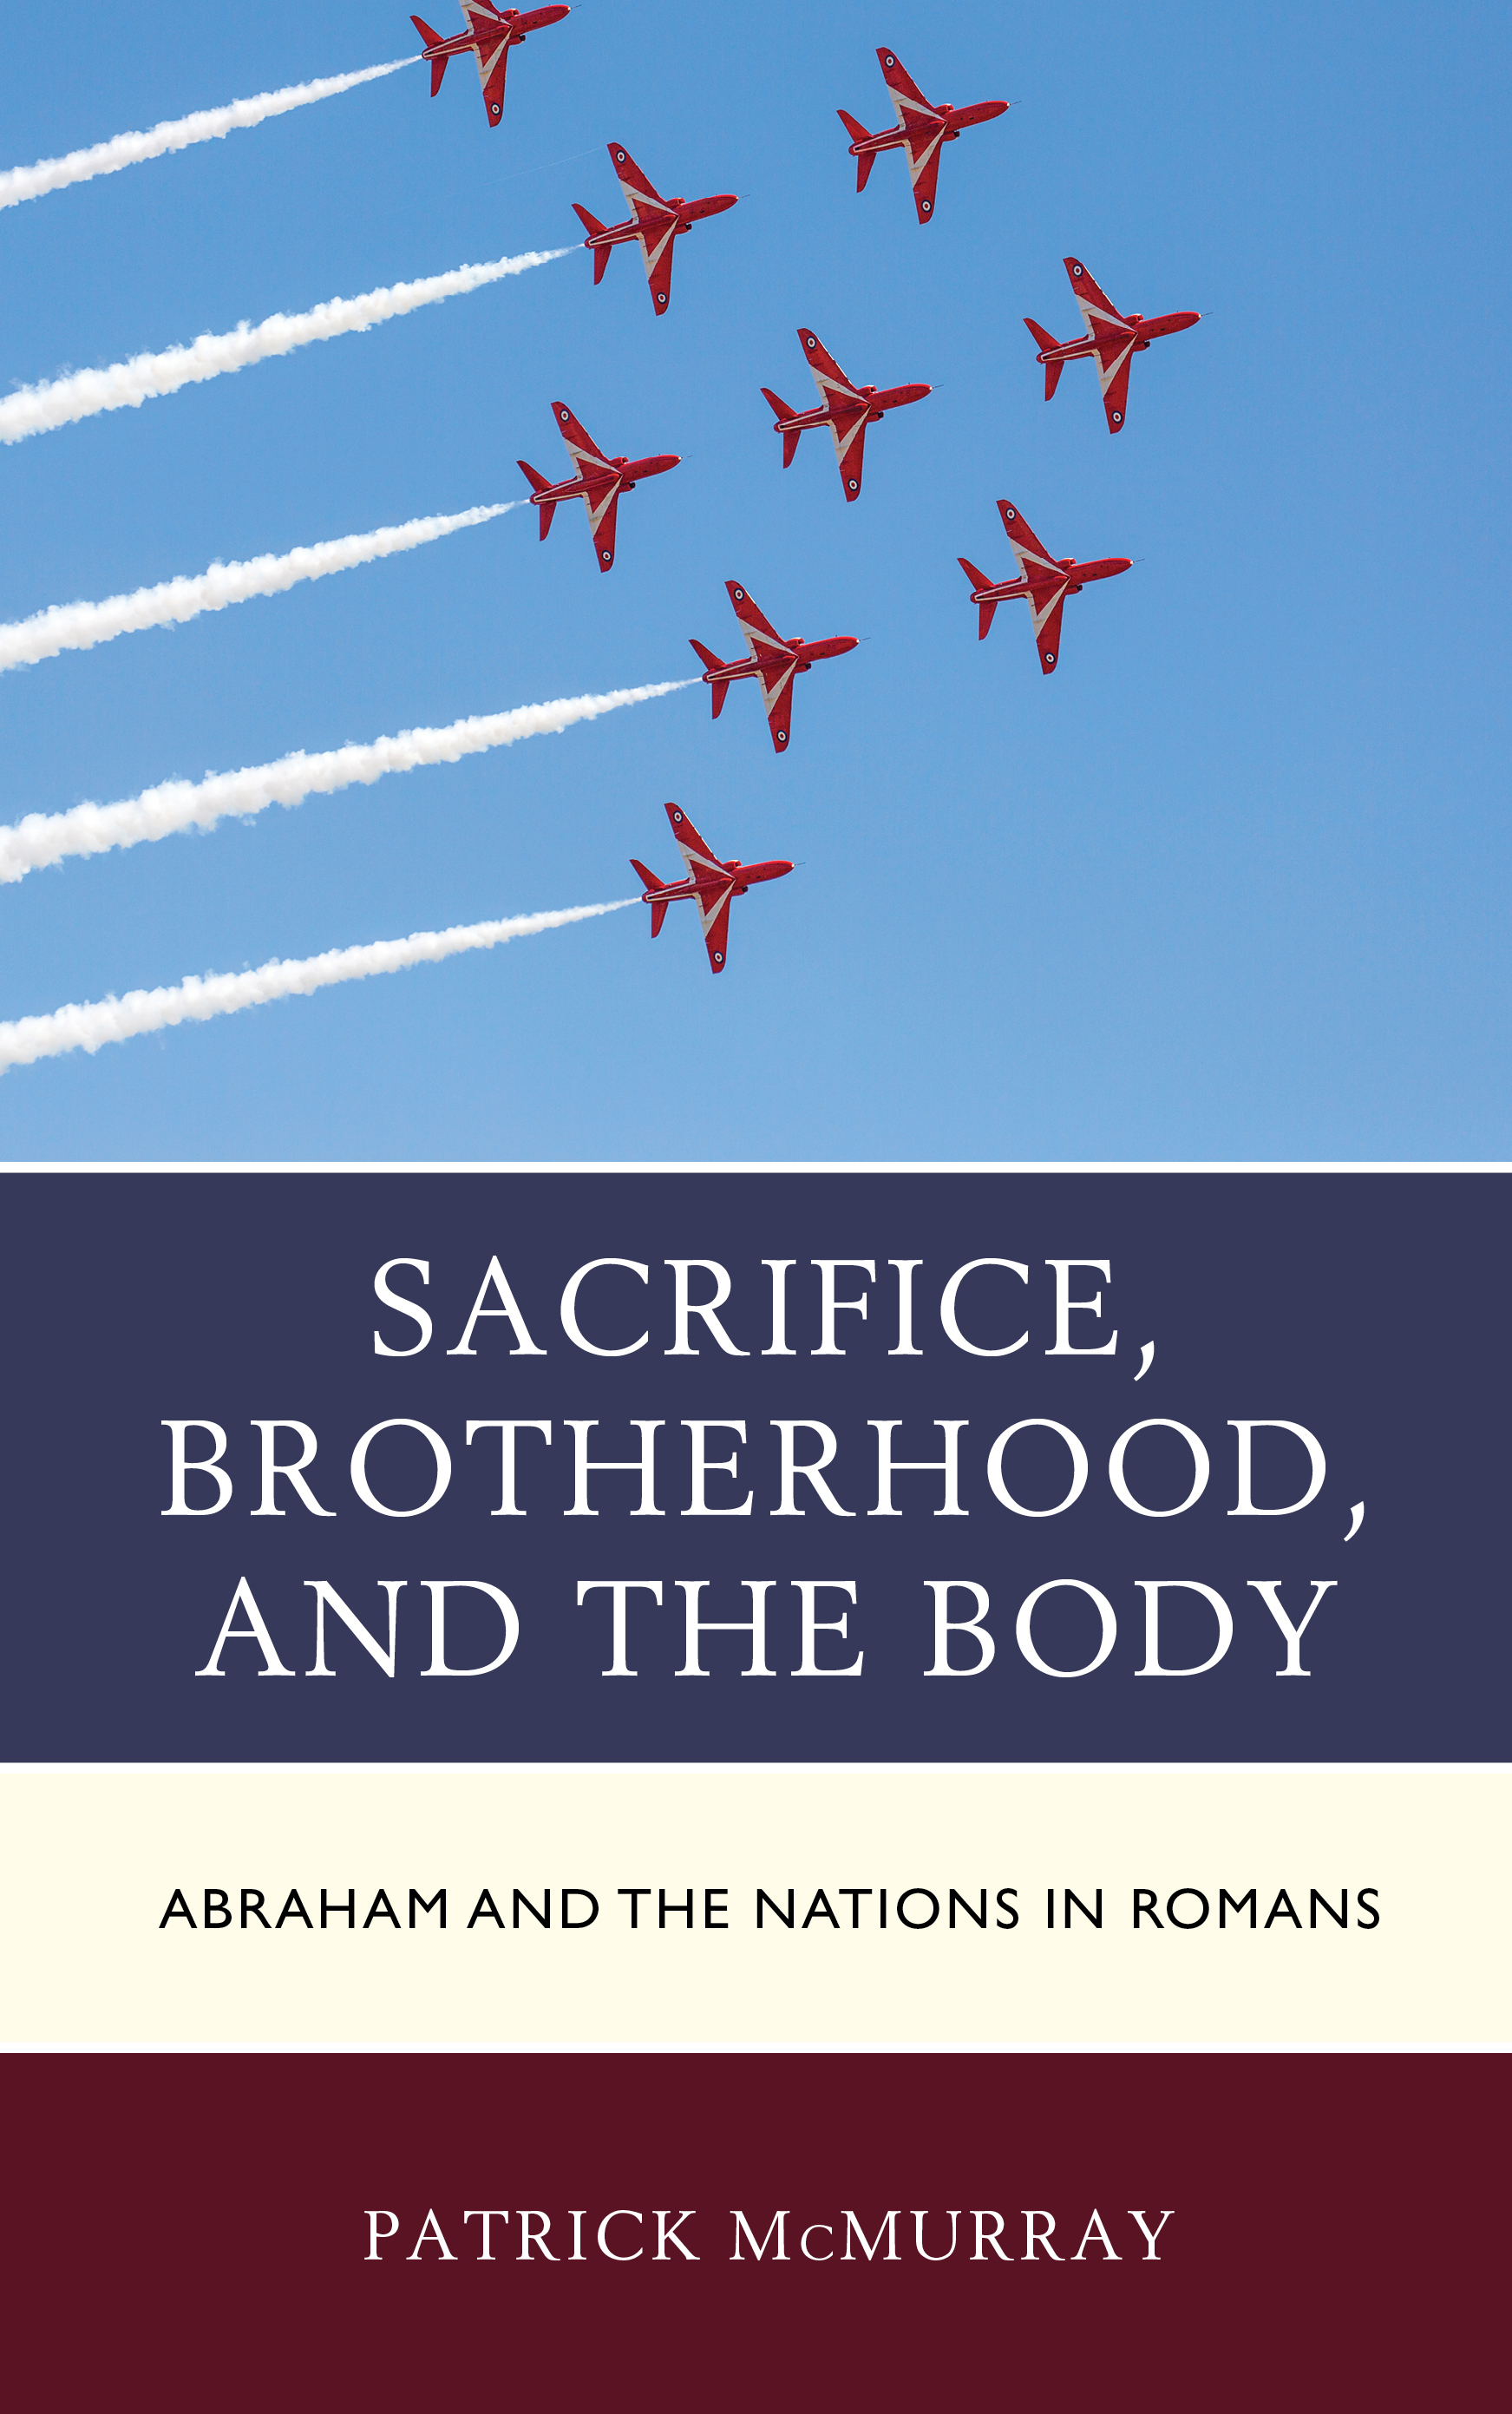 Sacrifice, Brotherhood, and the Body: Abraham and the Nations in Romans